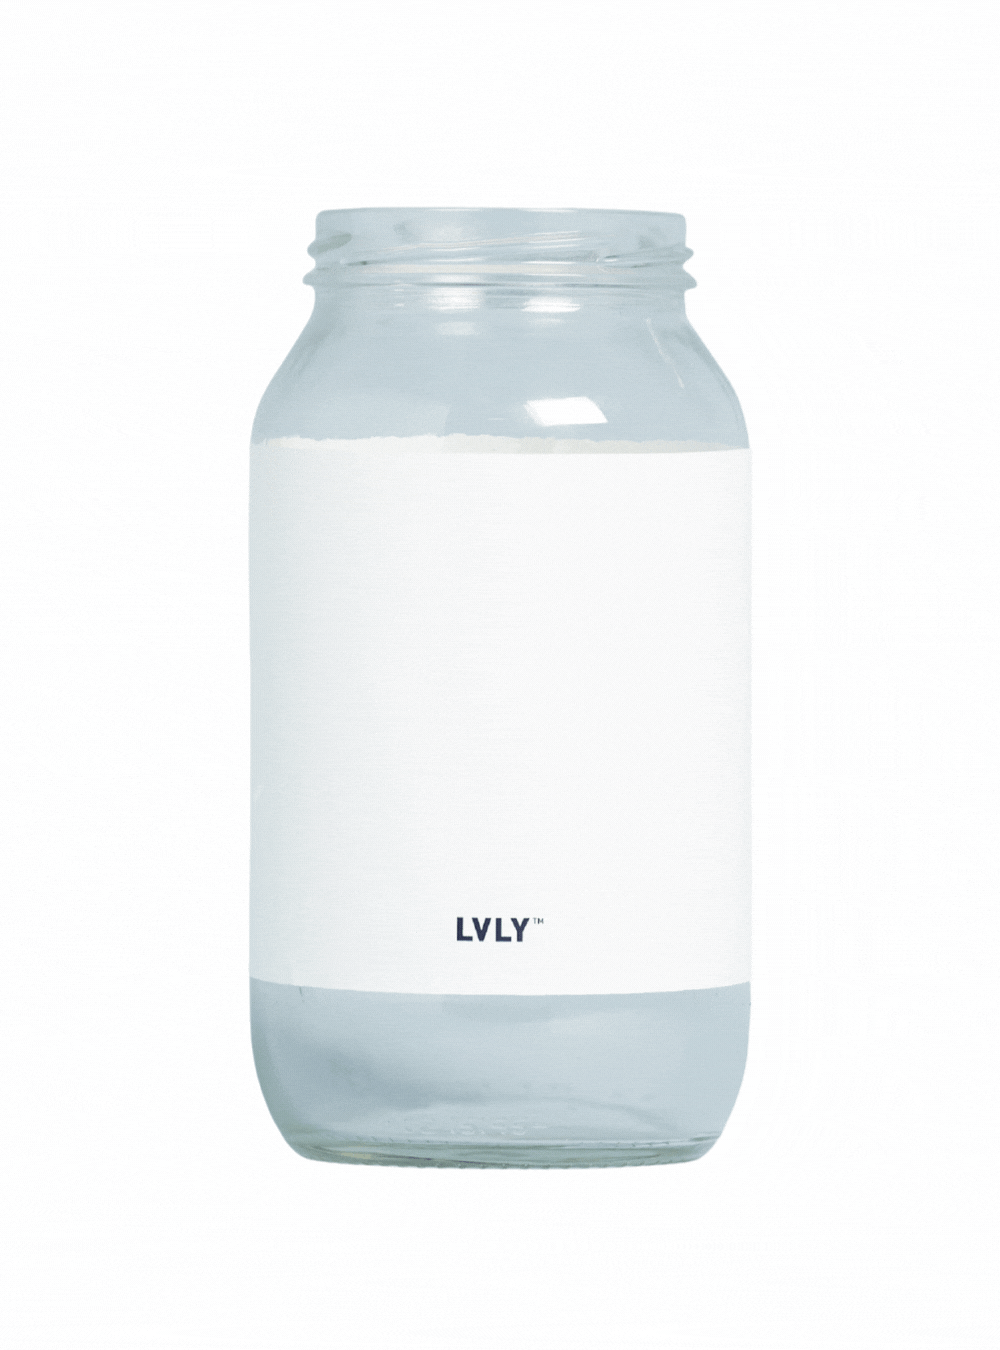 Personalise the jar